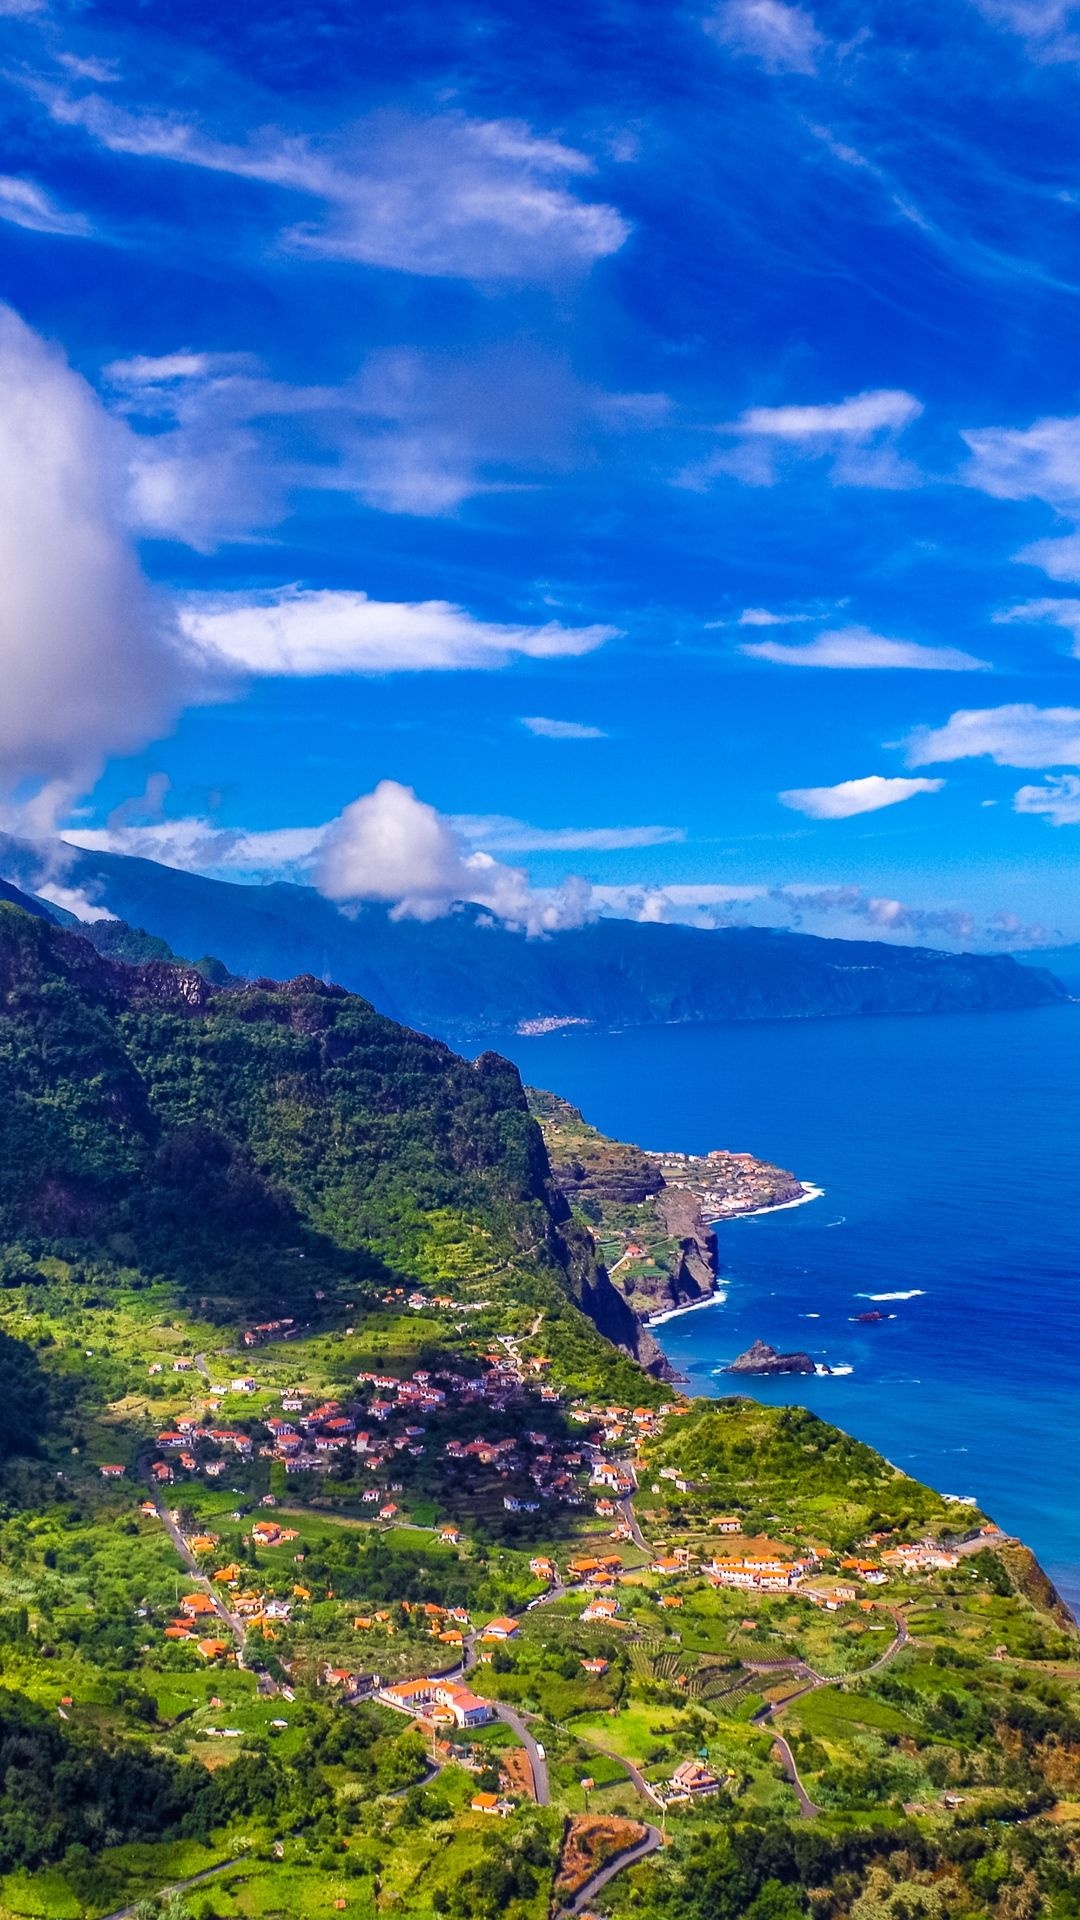 Madeira travels, Nature in HD, Stunning nature wallpapers, Nature's beauty, 1080x1920 Full HD Phone